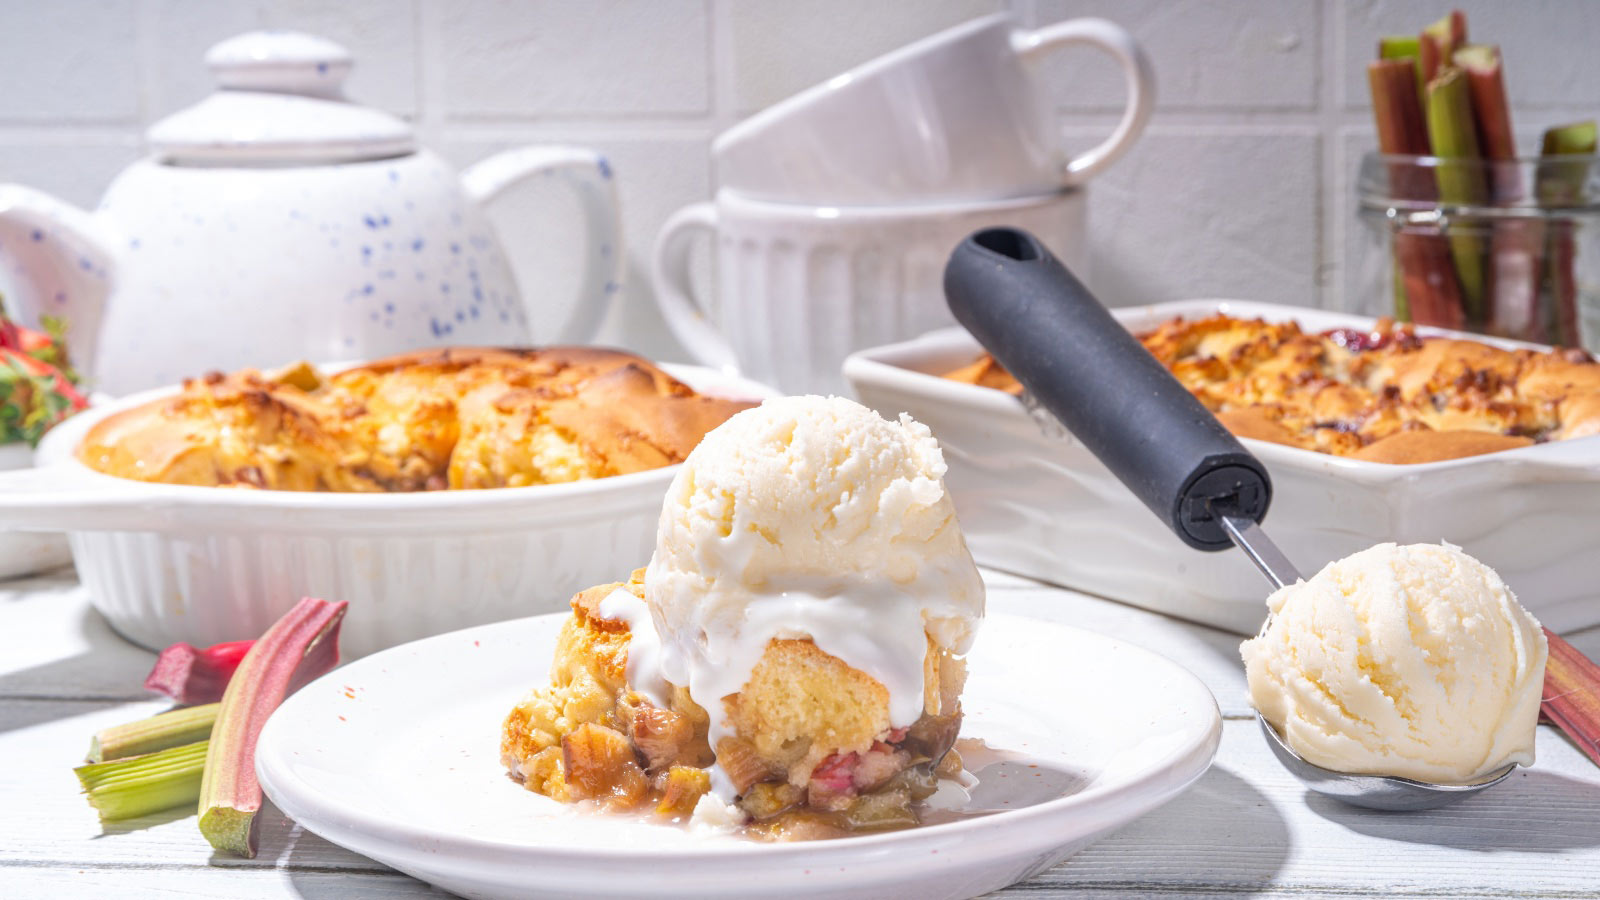 Sweet carrot cake cobbler served with vanilla ice cream ball, on sunny white wooden kitchen table.